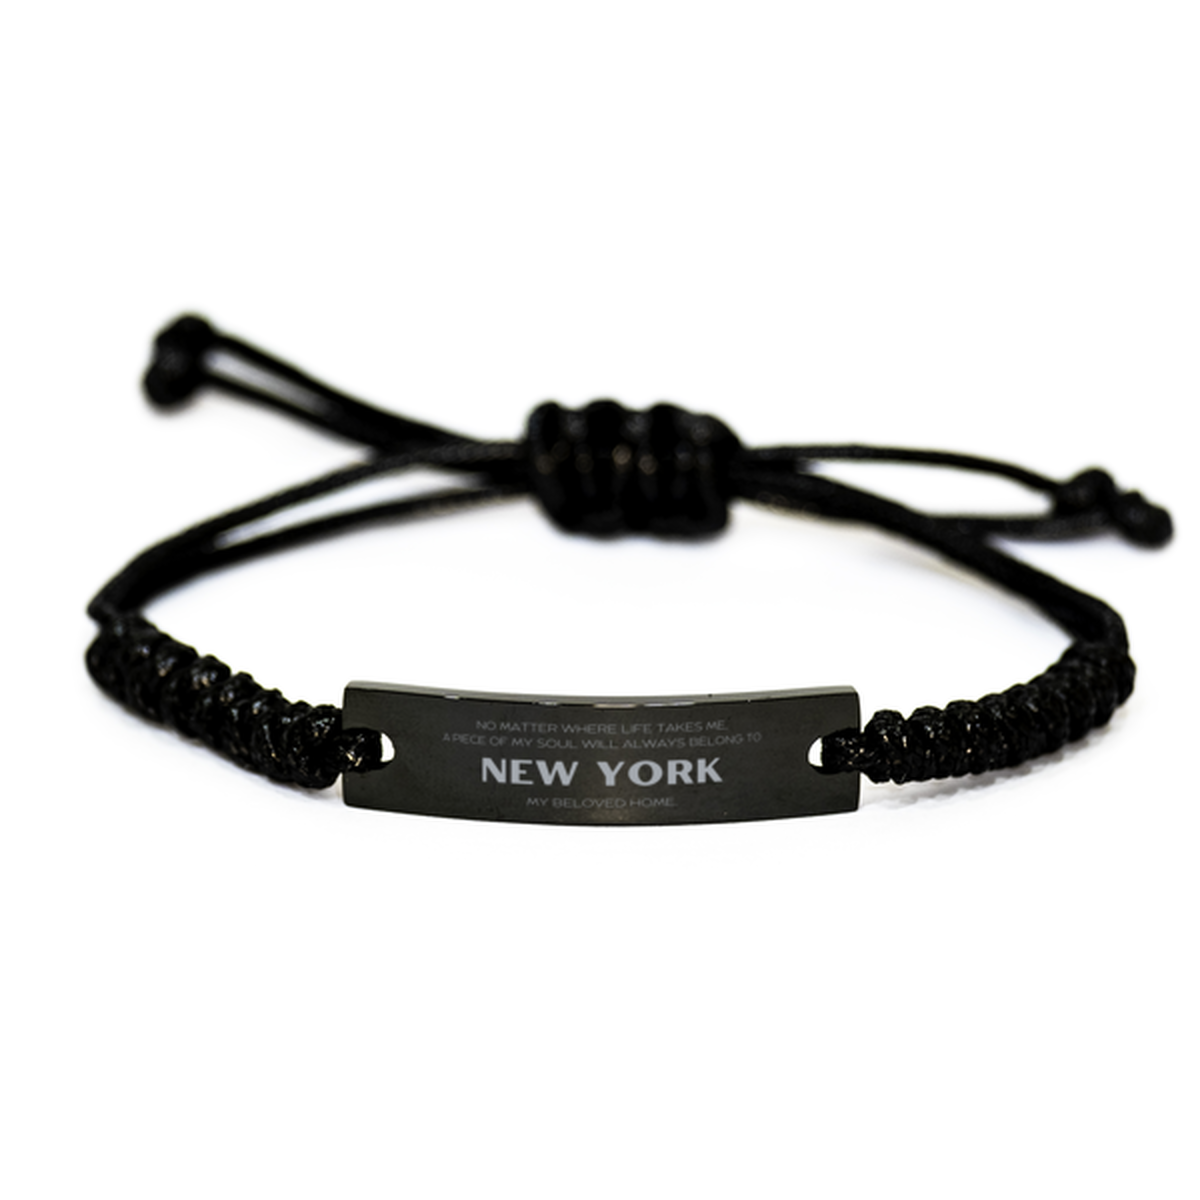 Love New York State Gifts, My soul will always belong to New York, Proud Black Rope Bracelet, Birthday Unique Gifts For New York Men, Women, Friends